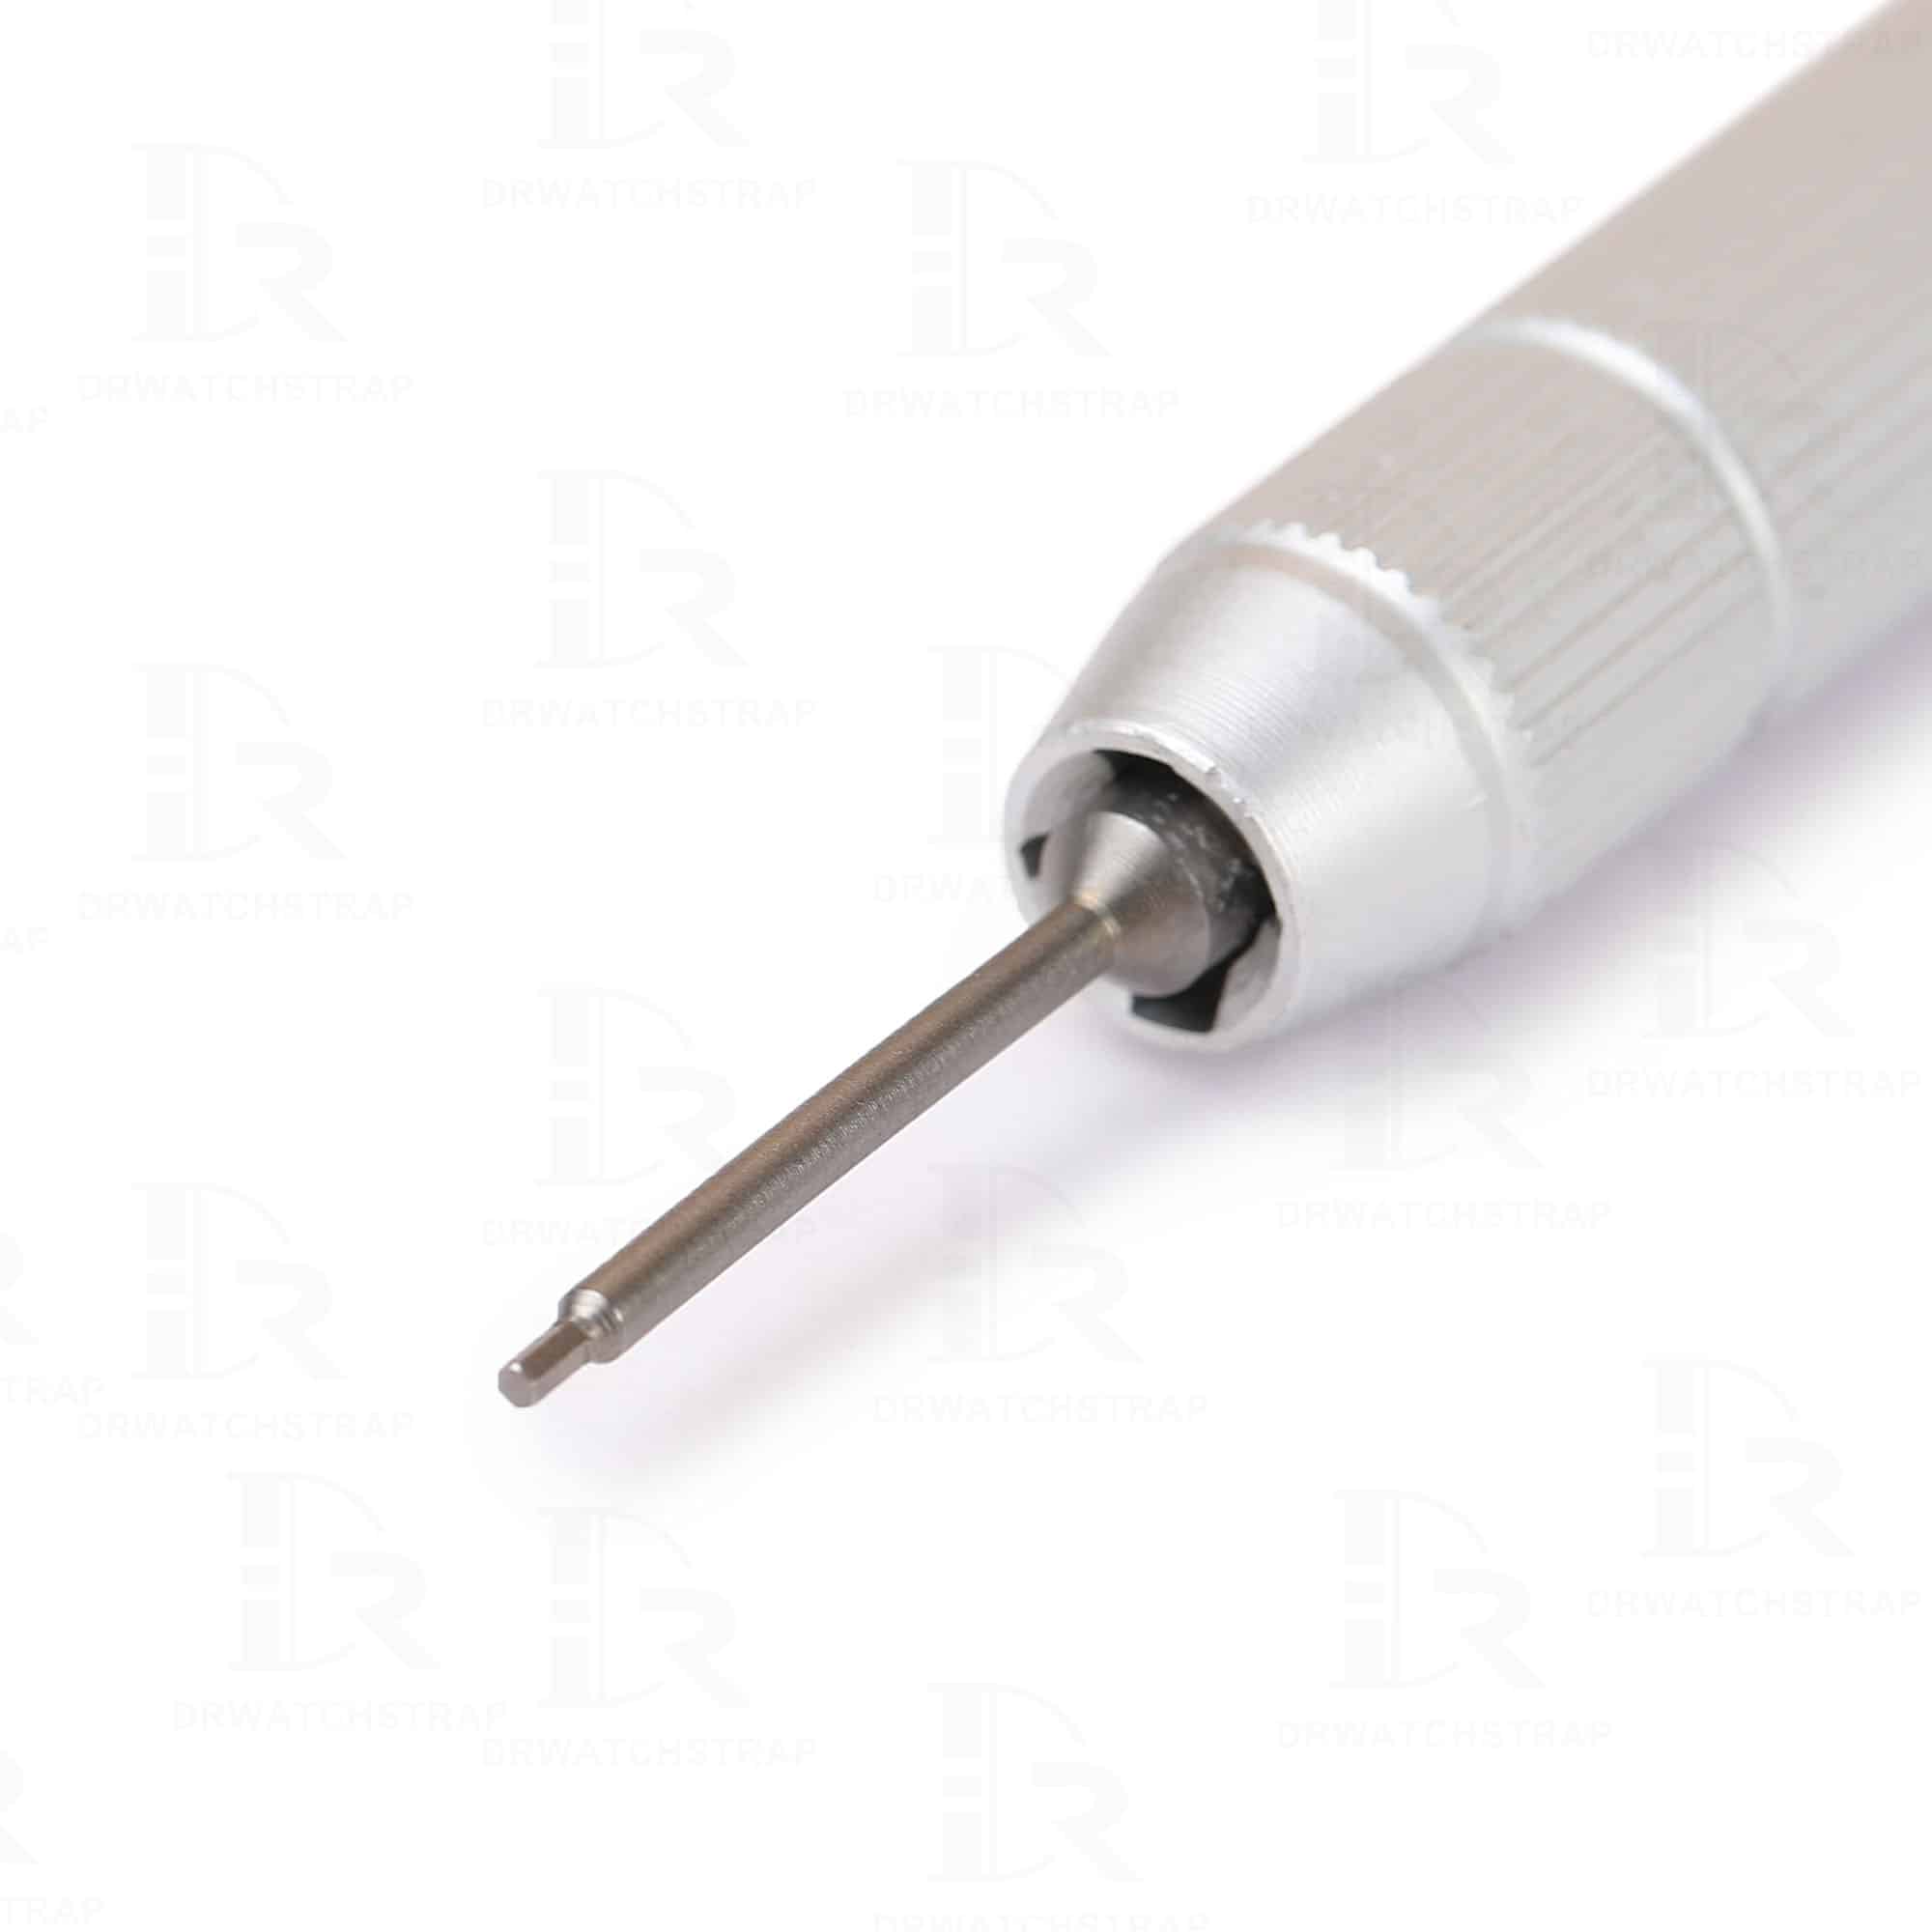 Blancpain watch screwdriver tool for sale low price